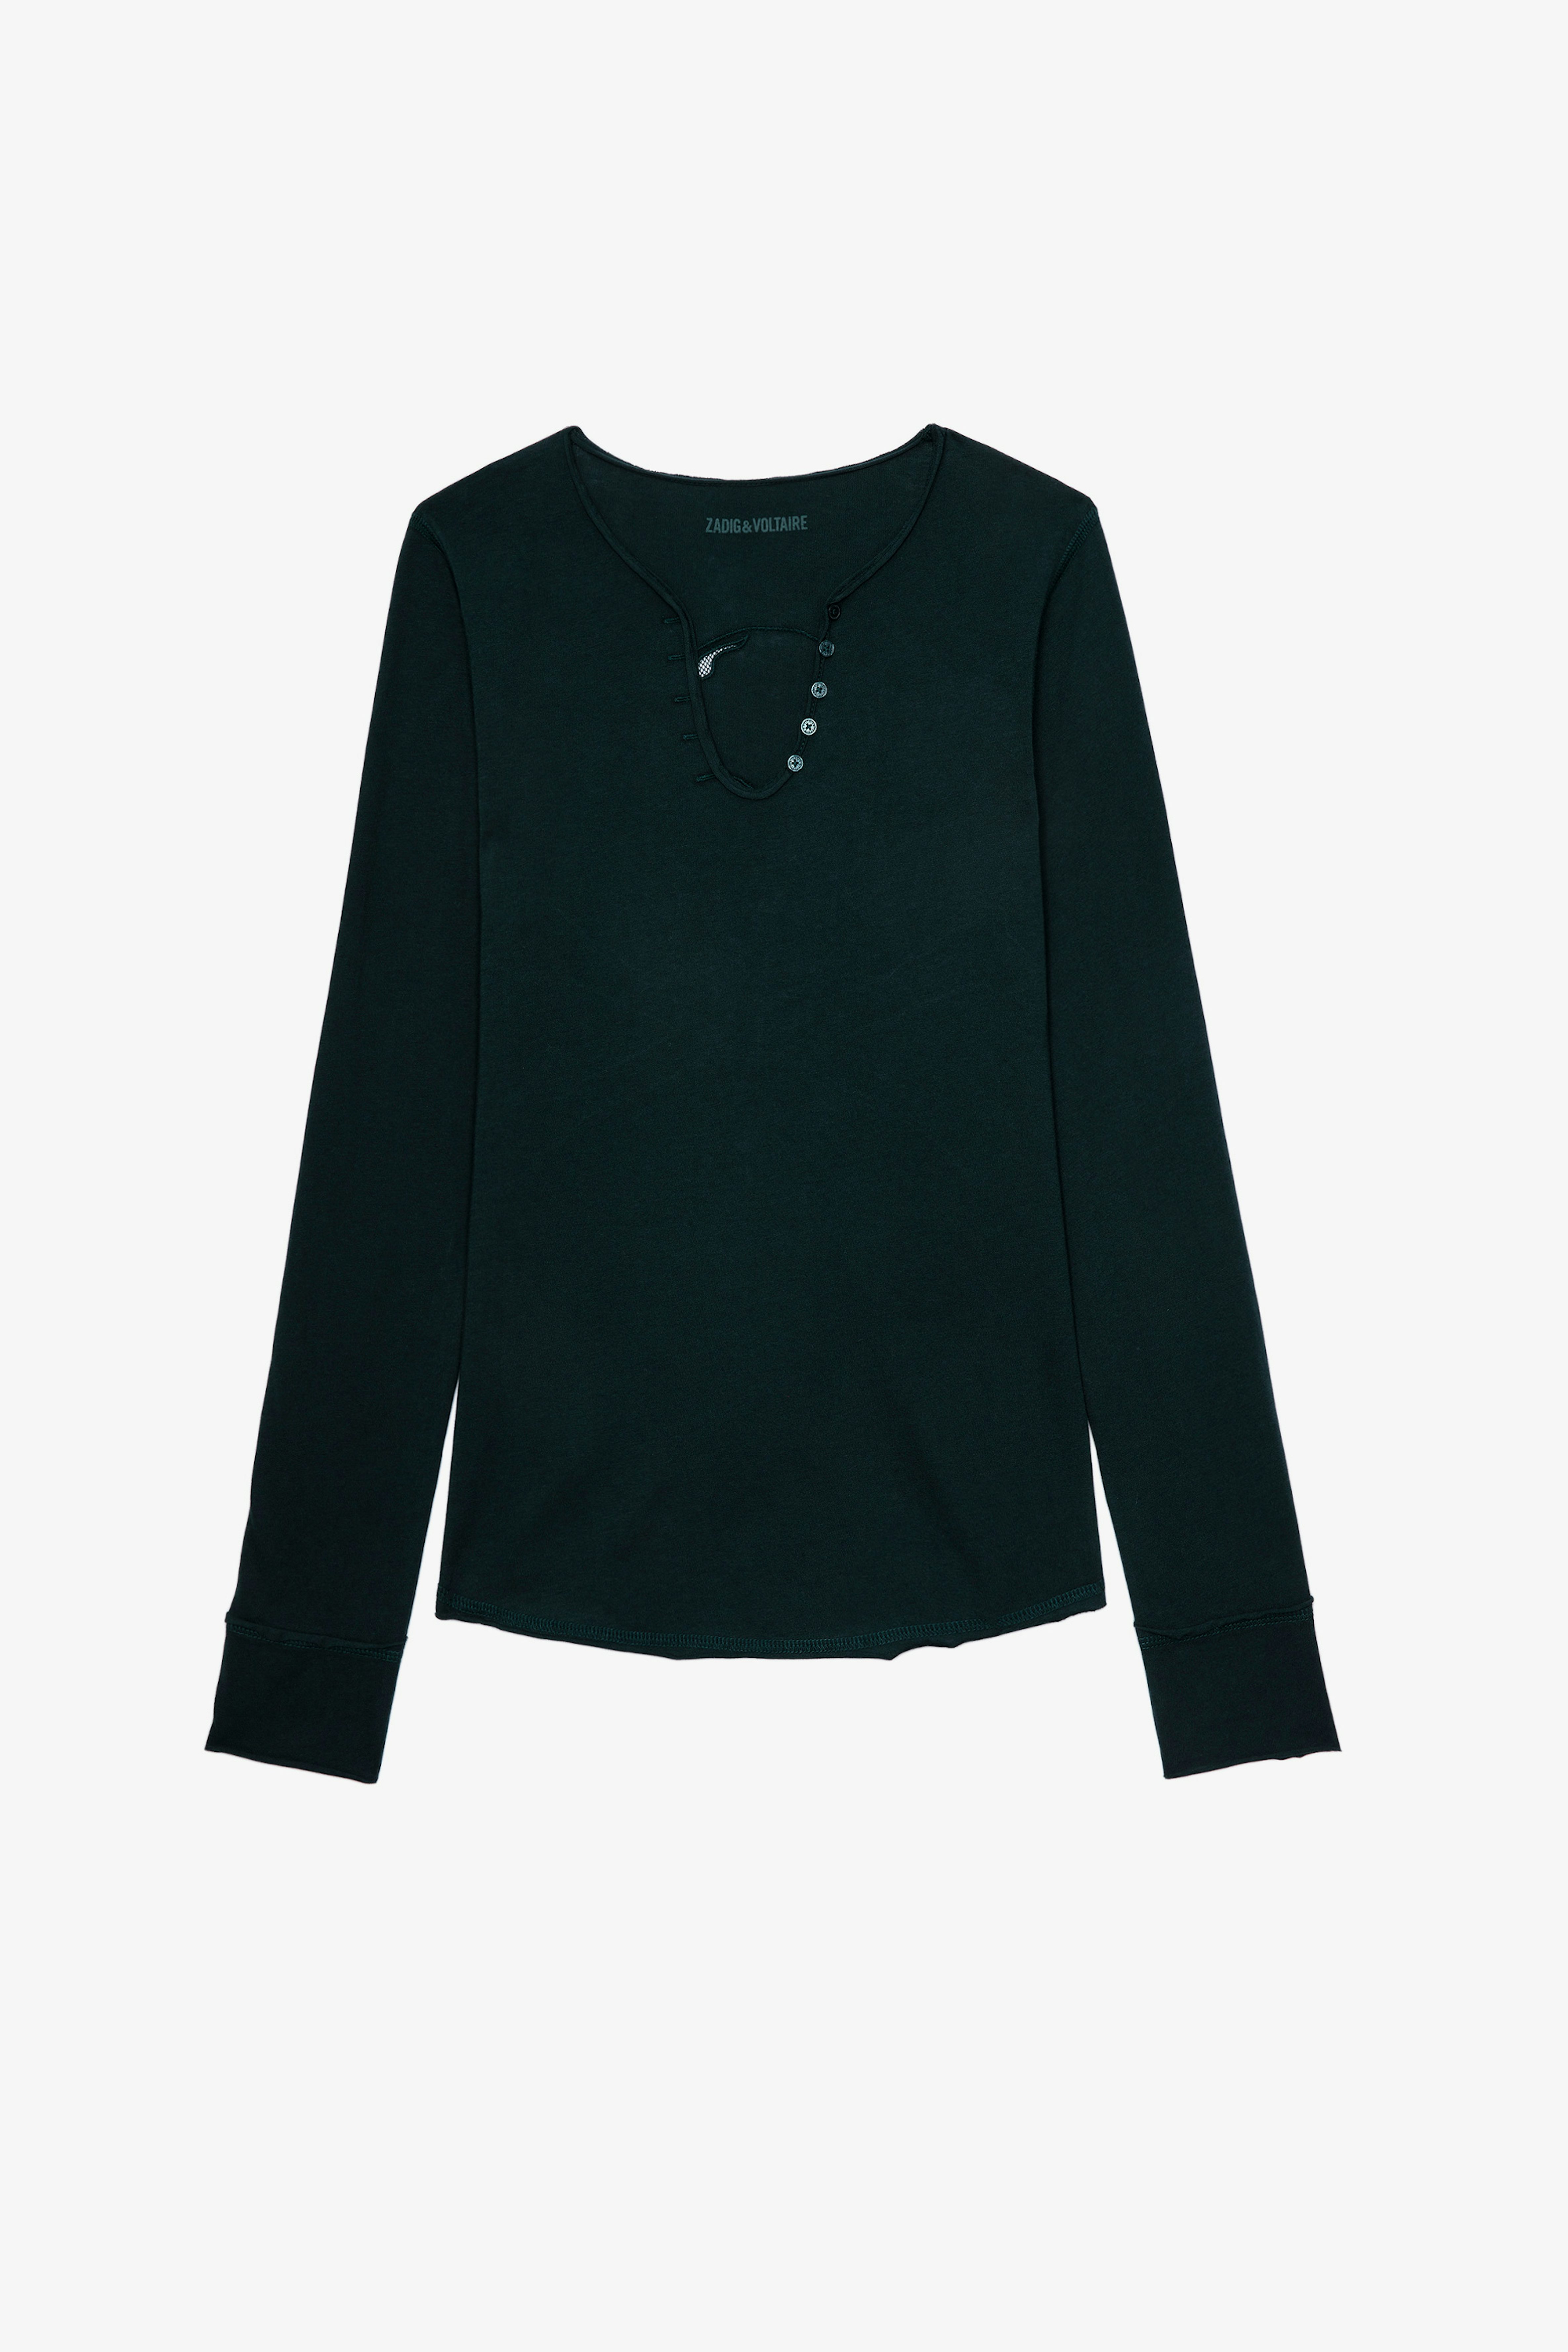 Women’s trendy jumpers, cardigans and jackets | Zadig&Voltaire